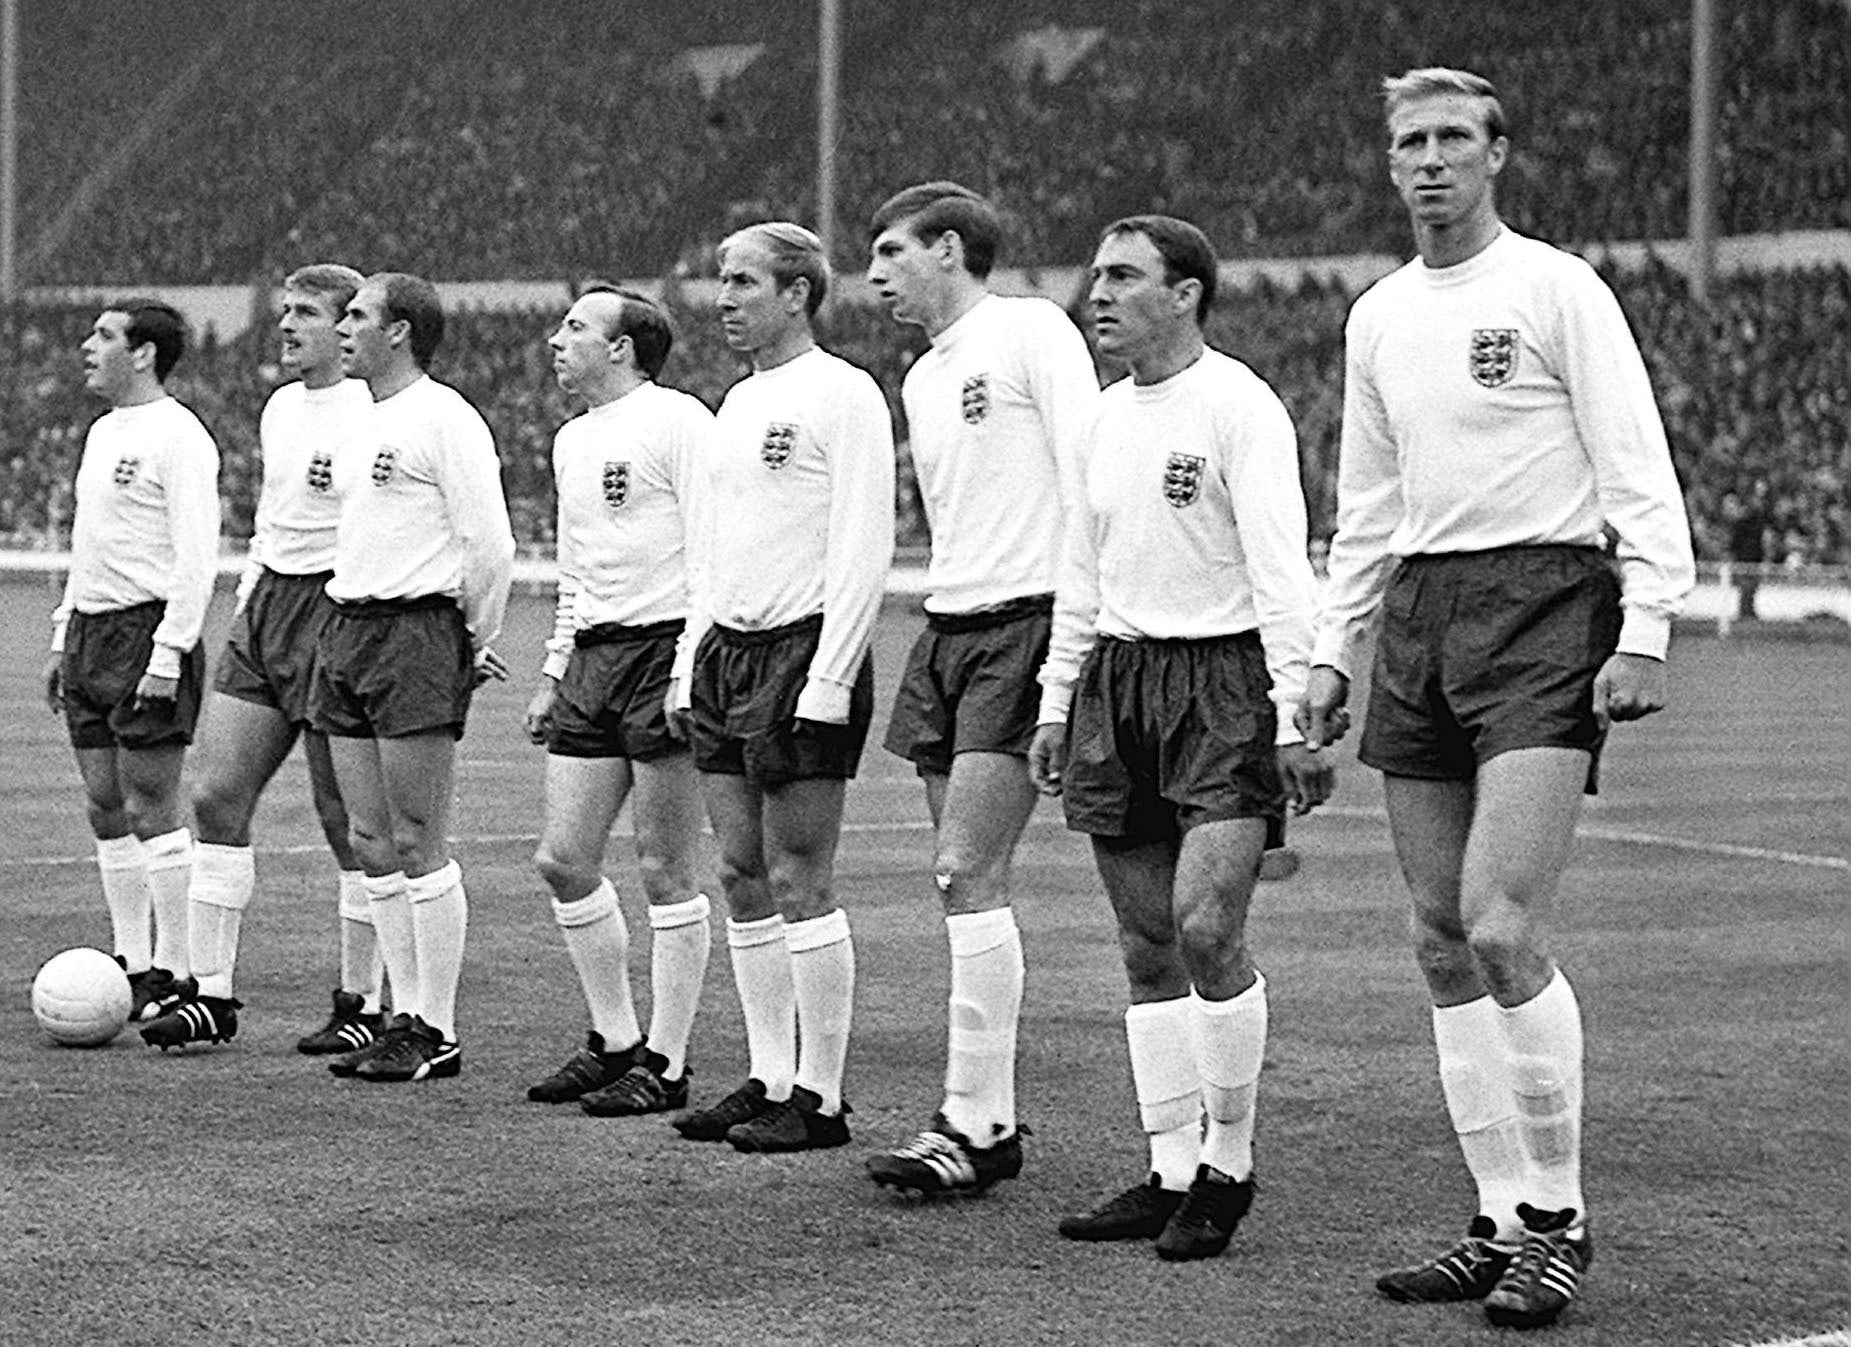 Hunt, second from left, played a key role for England at the 1966 World Cup (PA Archive)